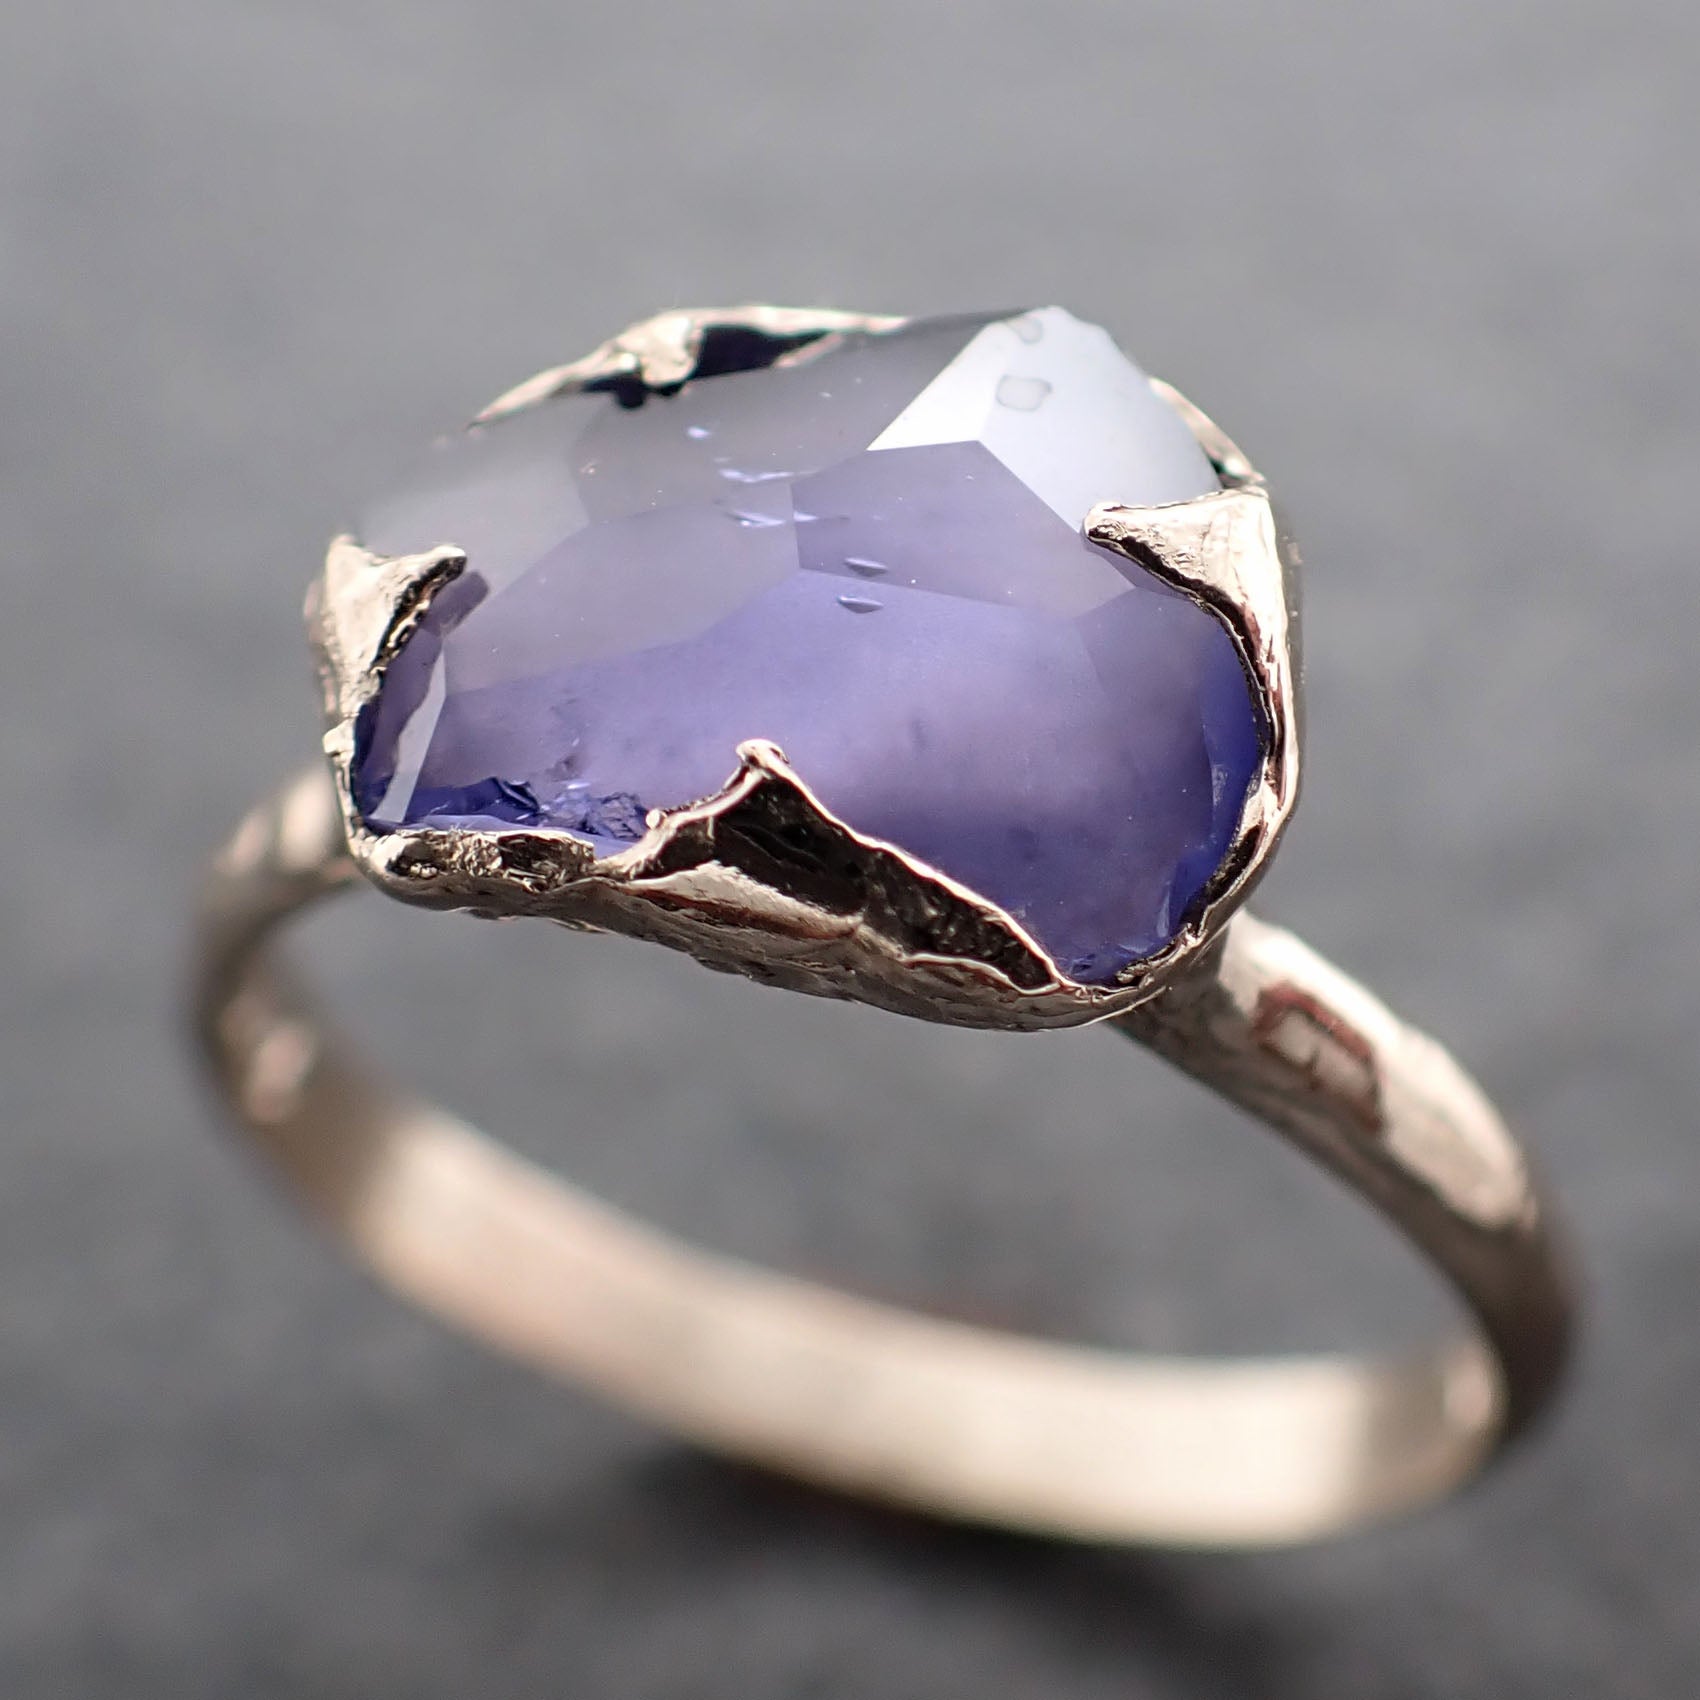 Partially Faceted Lavender Sapphire Solitaire 18k white Gold Engagement Ring Wedding Ring Custom One Of a Kind Gemstone Ring 2393